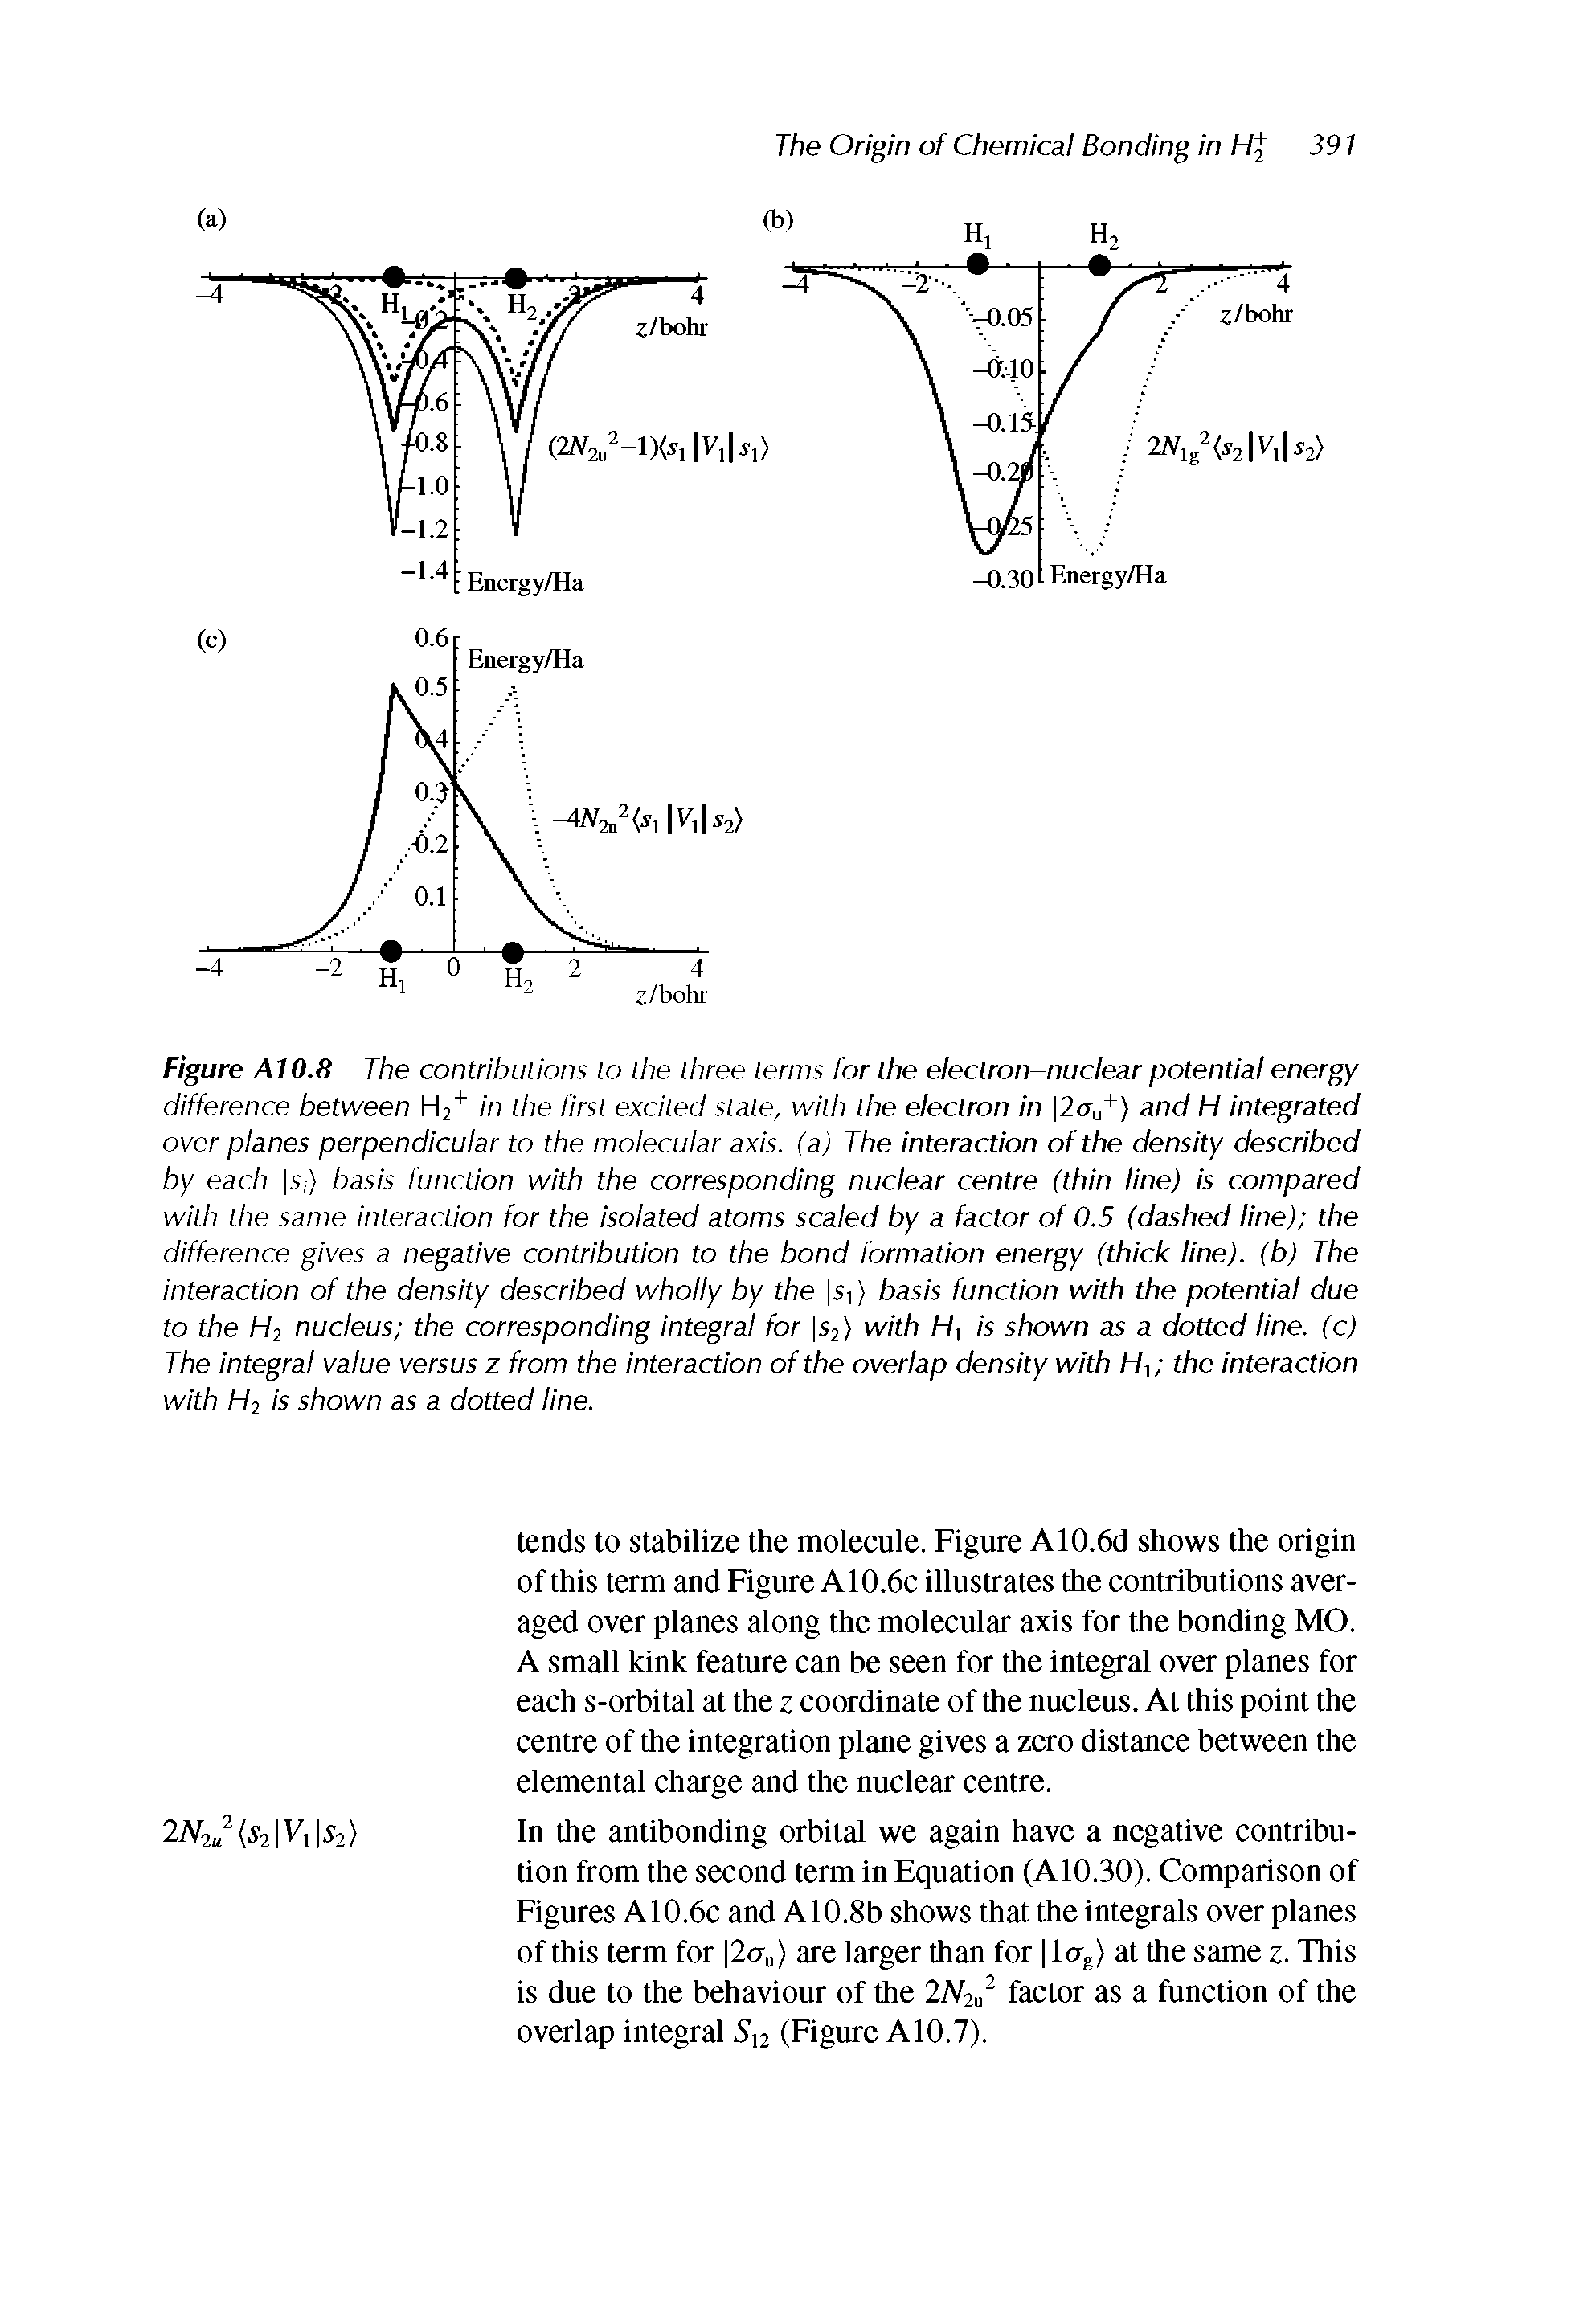 Figure A10.8 The contributions to the three terms for the electron nuclear potential energy difference between H2 in the first excited state, with the electron in 2a ) and H integrated over planes perpendicular to the molecular axis, (a) The interaction of the density described by each s,) basis function with the corresponding nuclear centre (thin line) is compared with the same interaction for the isolated atoms scaled by a factor of 0.5 (dashed line) the difference gives a negative contribution to the bond formation energy (thick line), (b) The interaction of the density described wholly by the Si> basis function with the potential due to the H2 nucleus the corresponding integral for IS2) with H, is shown as a dotted line, (c) The integral value versus z from the interaction of the overlap density with H the interaction with Hi is shown as a dotted line.